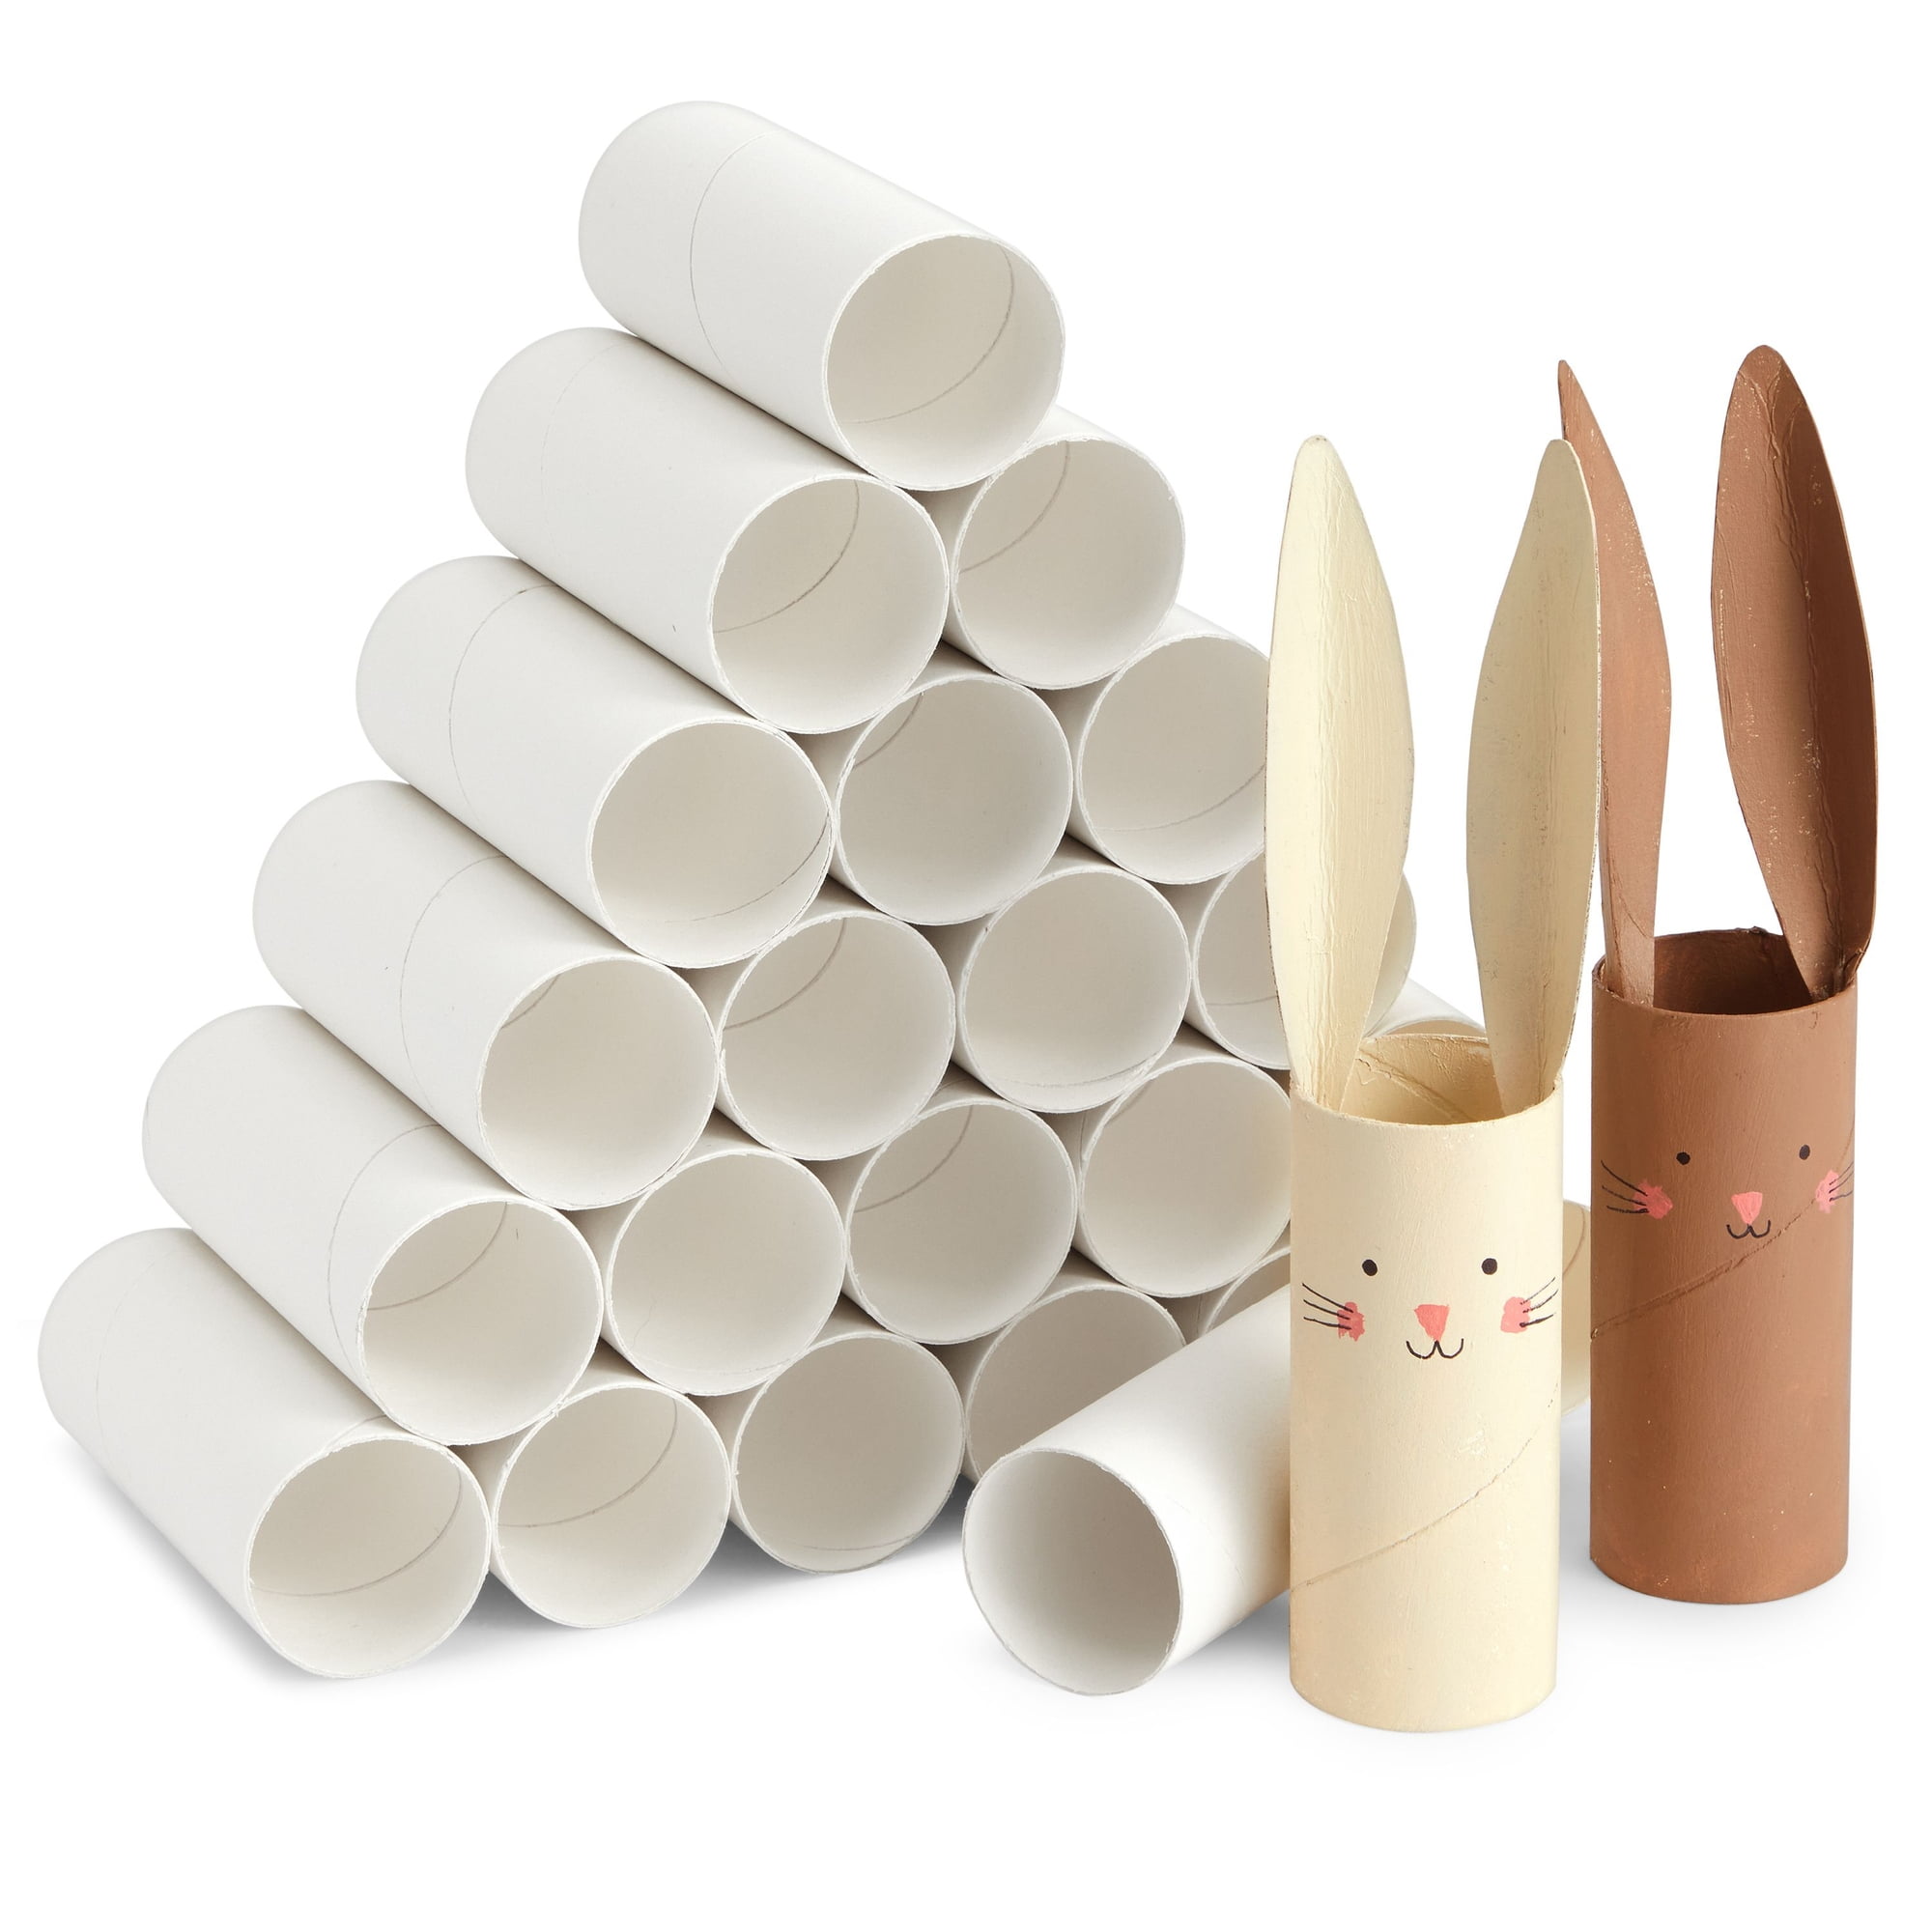 Toilet Paper Roll Musical Instrument Craft • All Natural & Good • Crafts